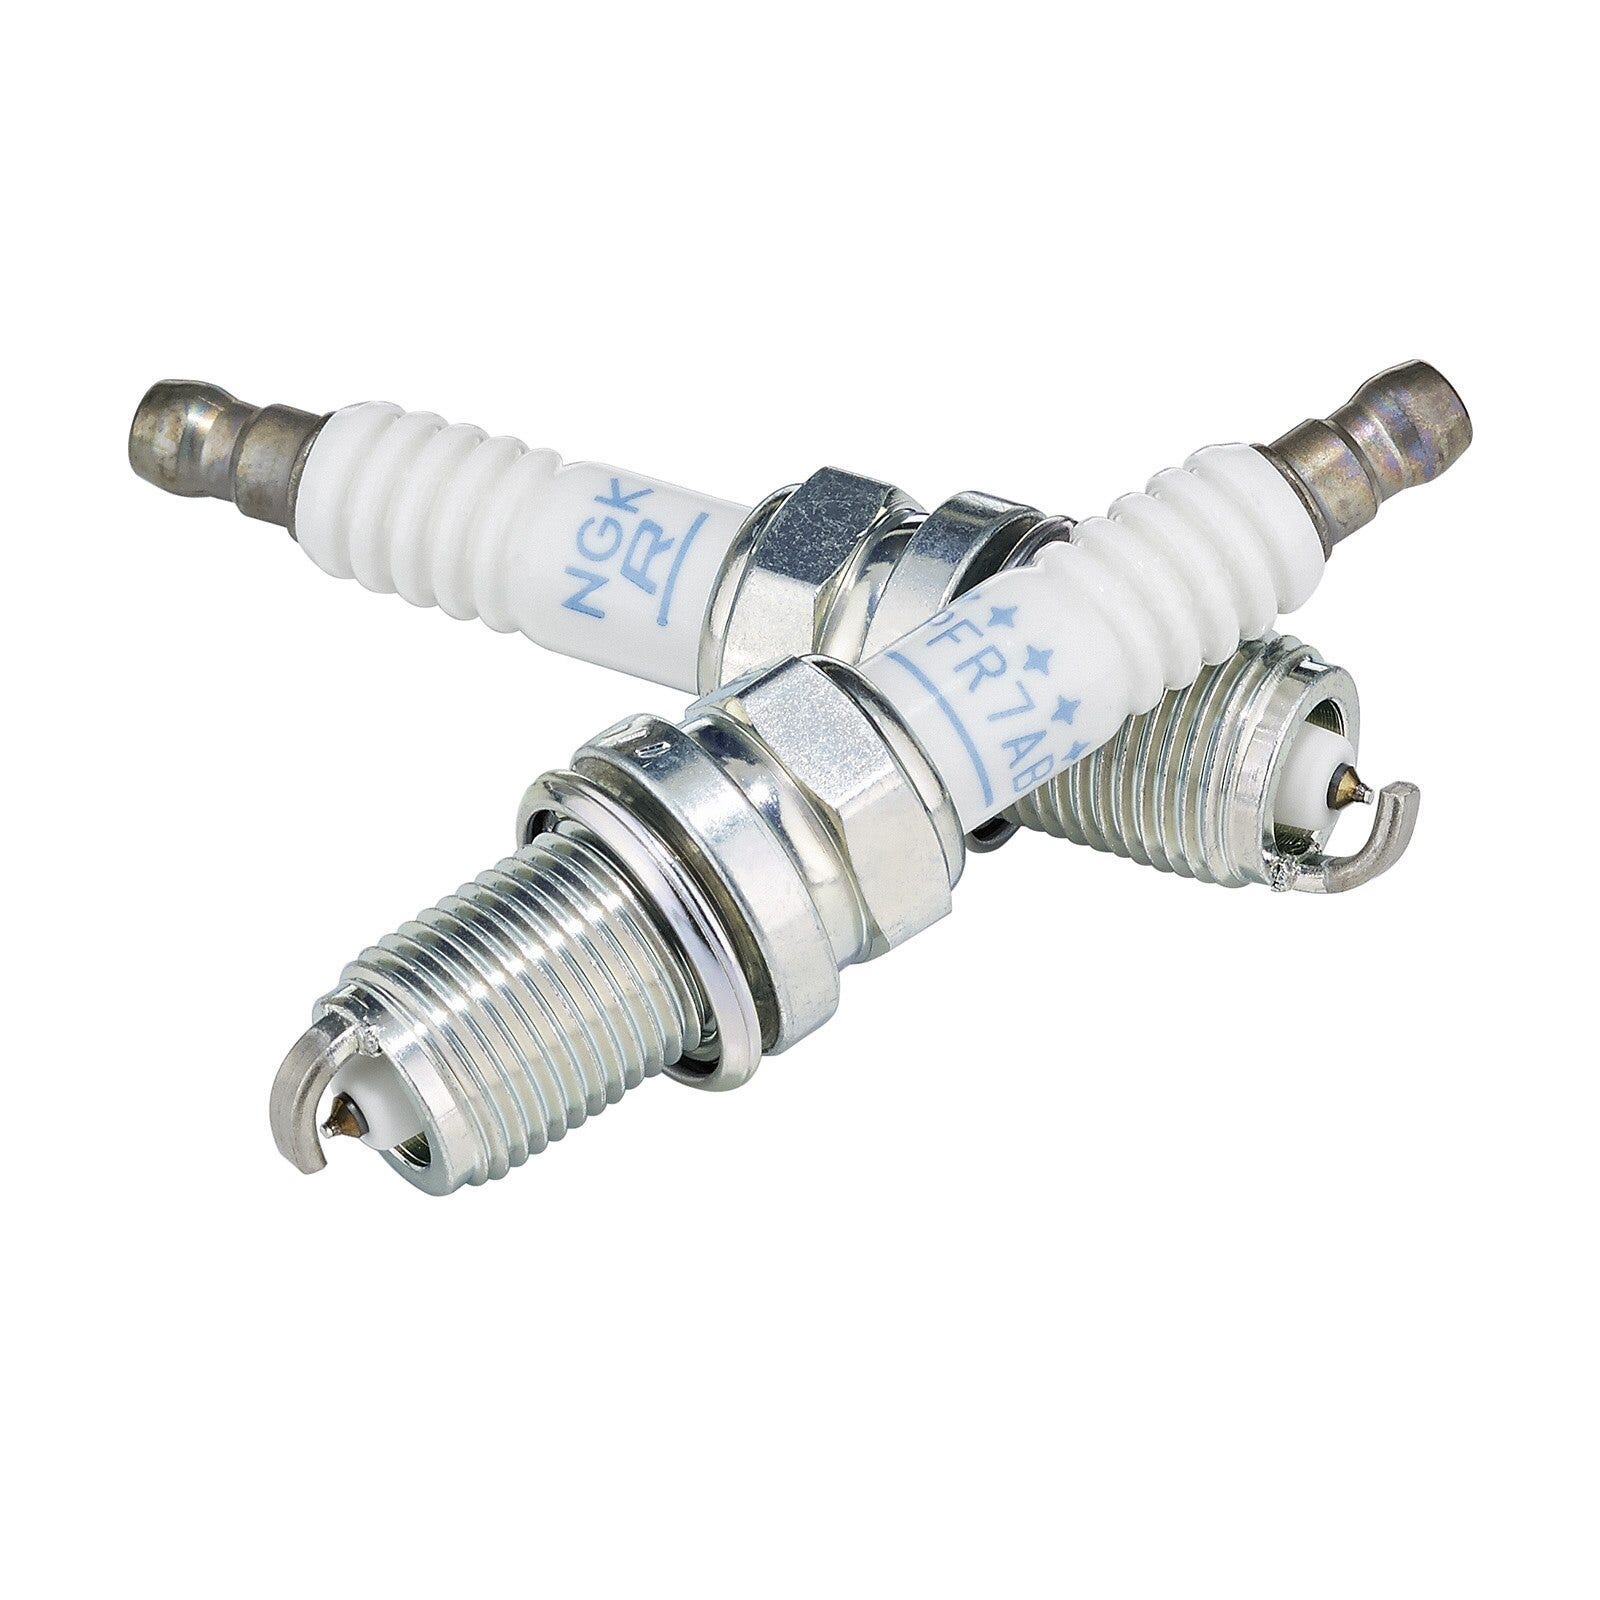 NGK Spark Plugs - 415128524 - The Parts Lodge